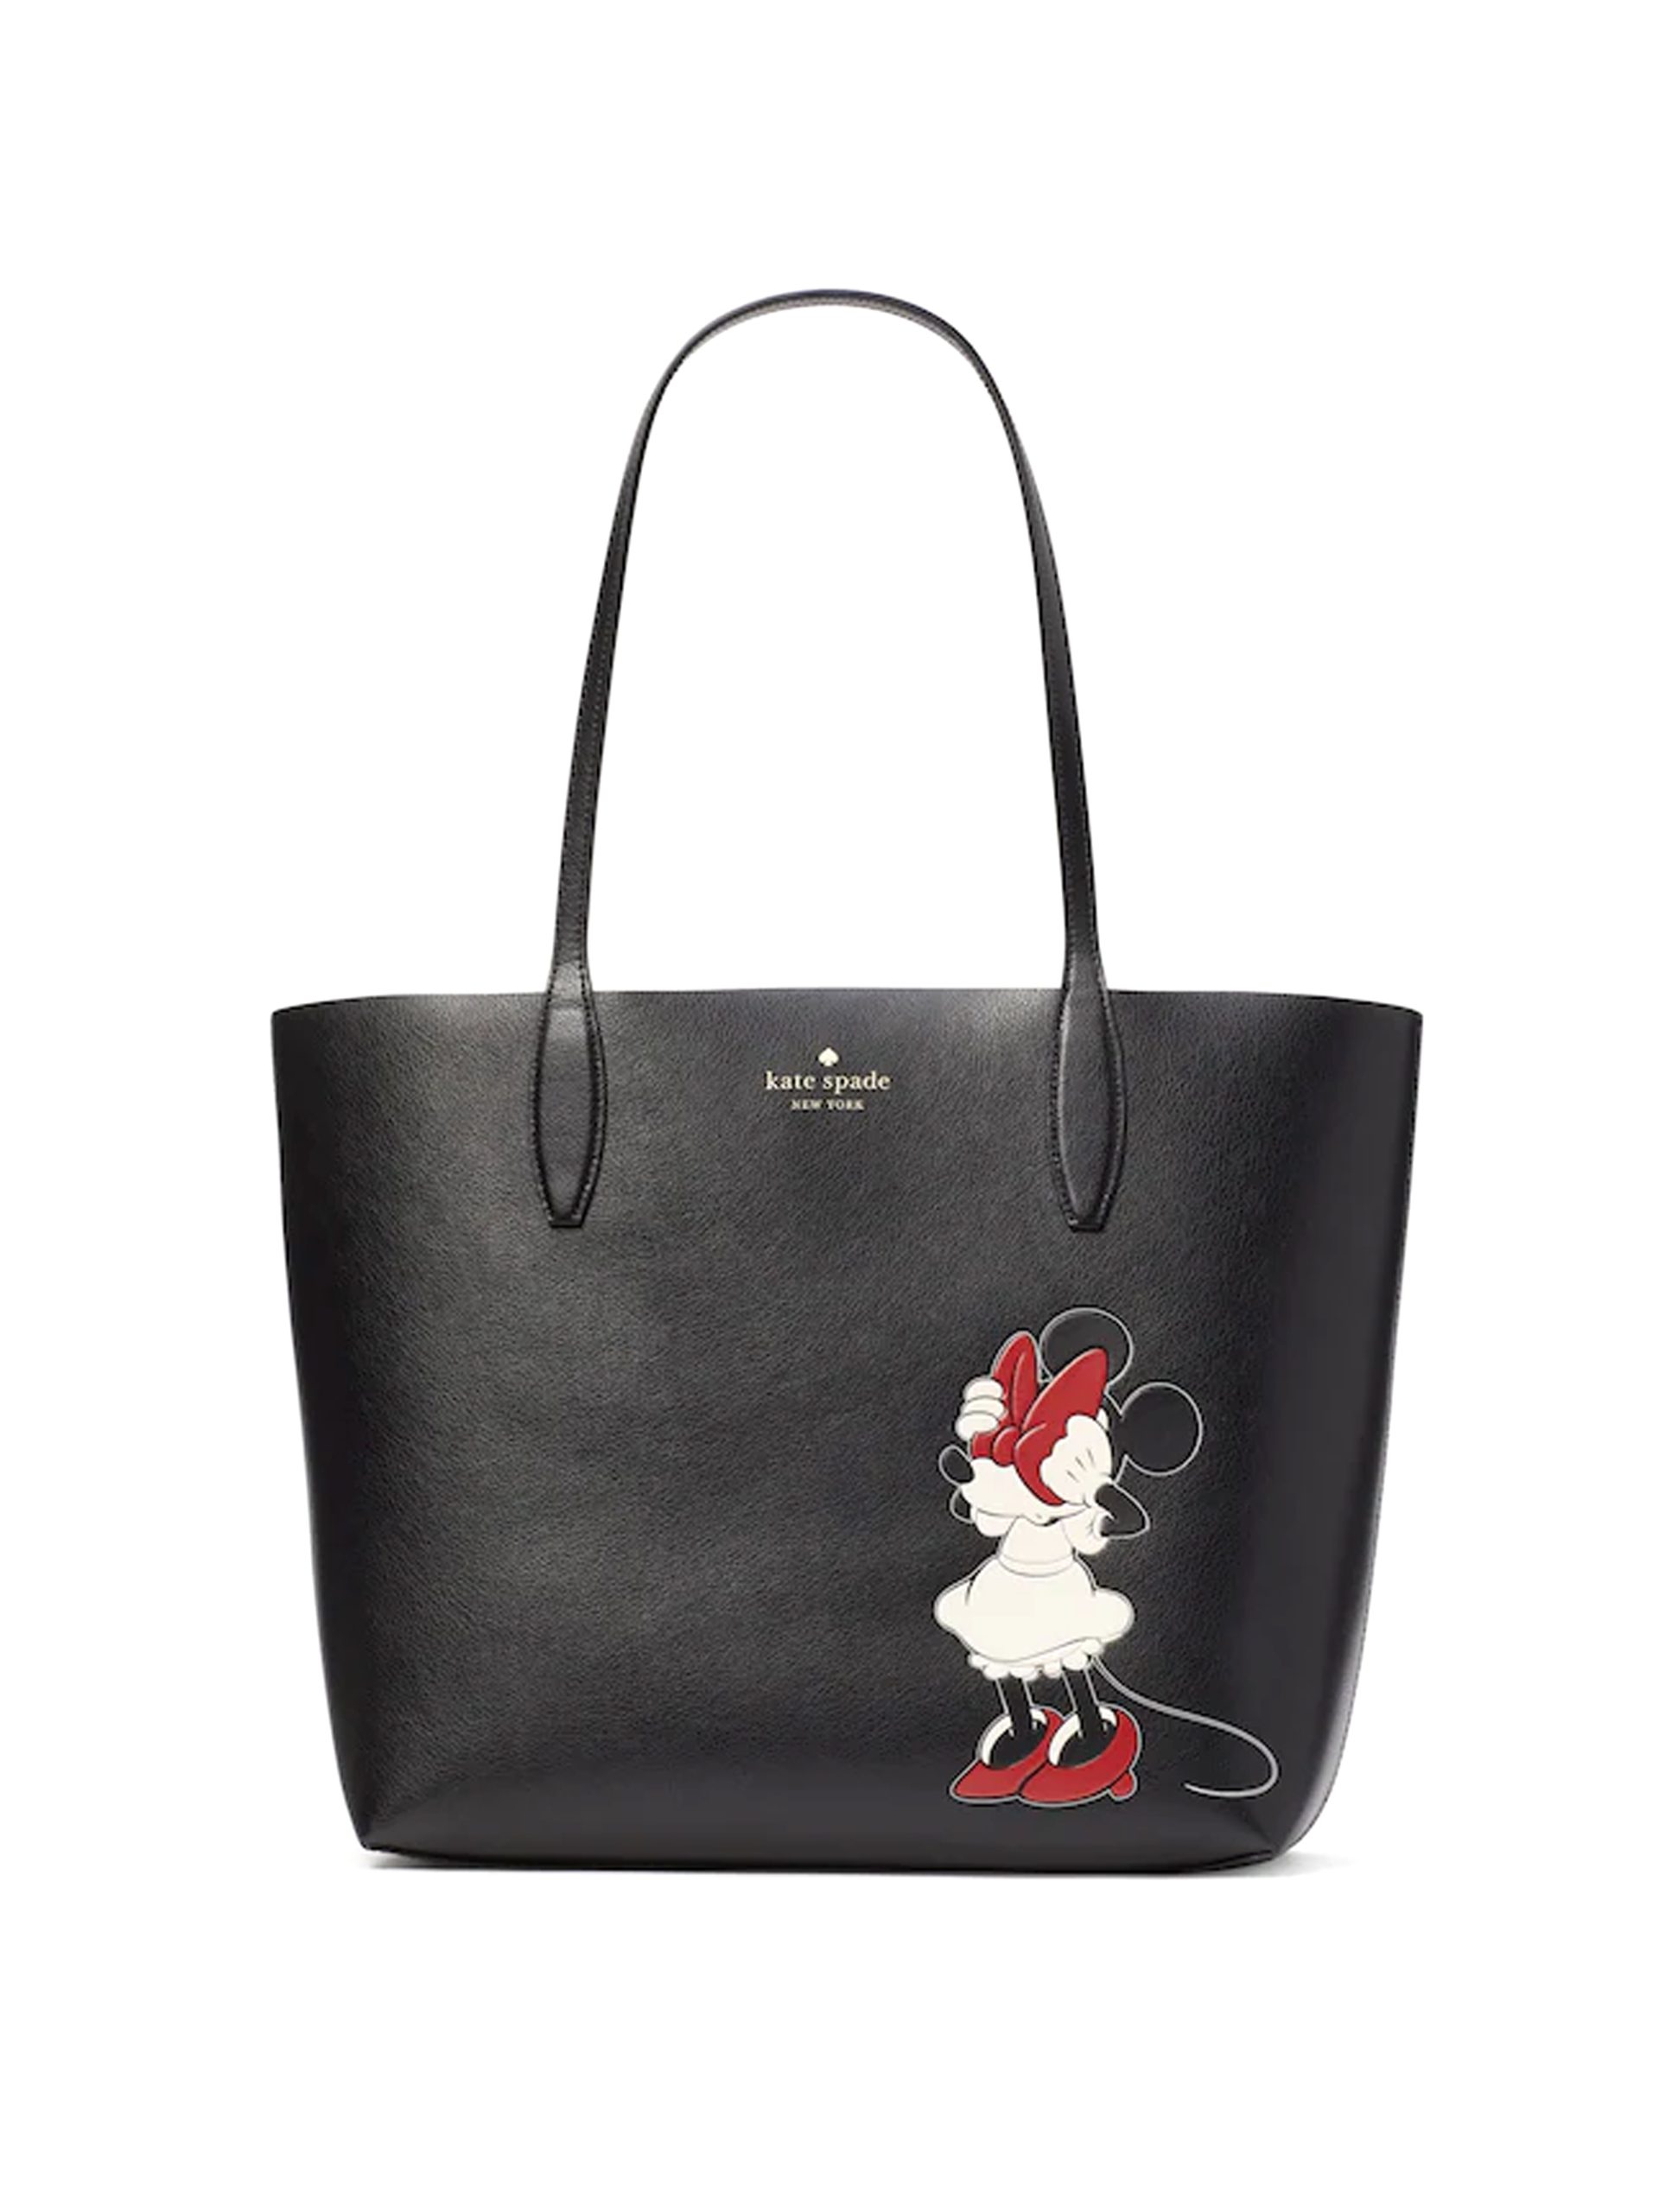 Kate Spade minnie mouse reversible tote in black - Amory